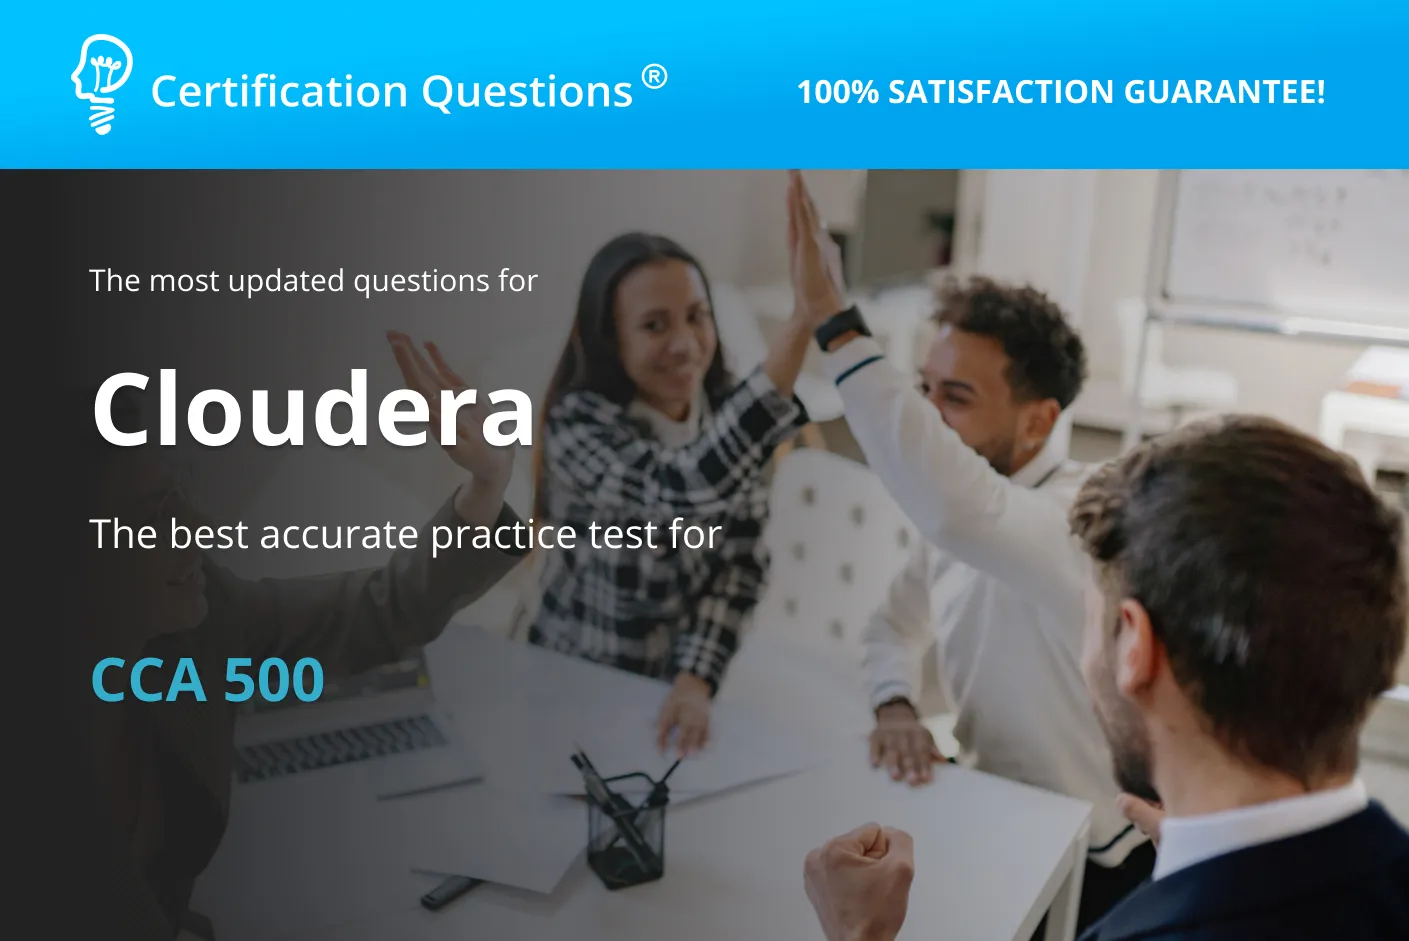 Here is the image for the study guide of the cloudera certification practice test